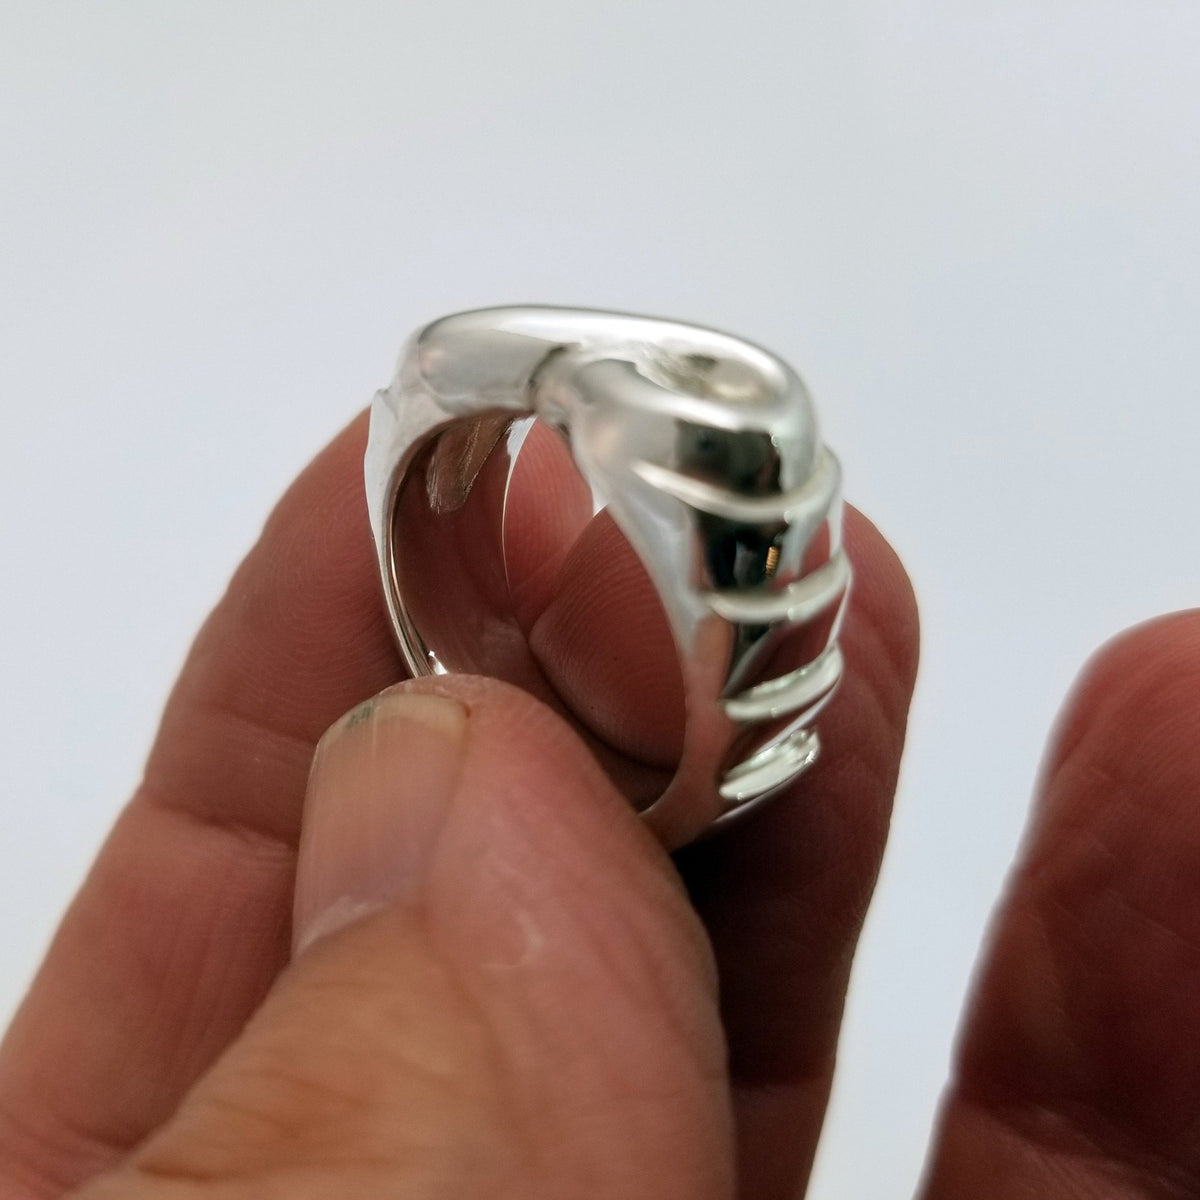 Cool unique and one of a kind infinity ring